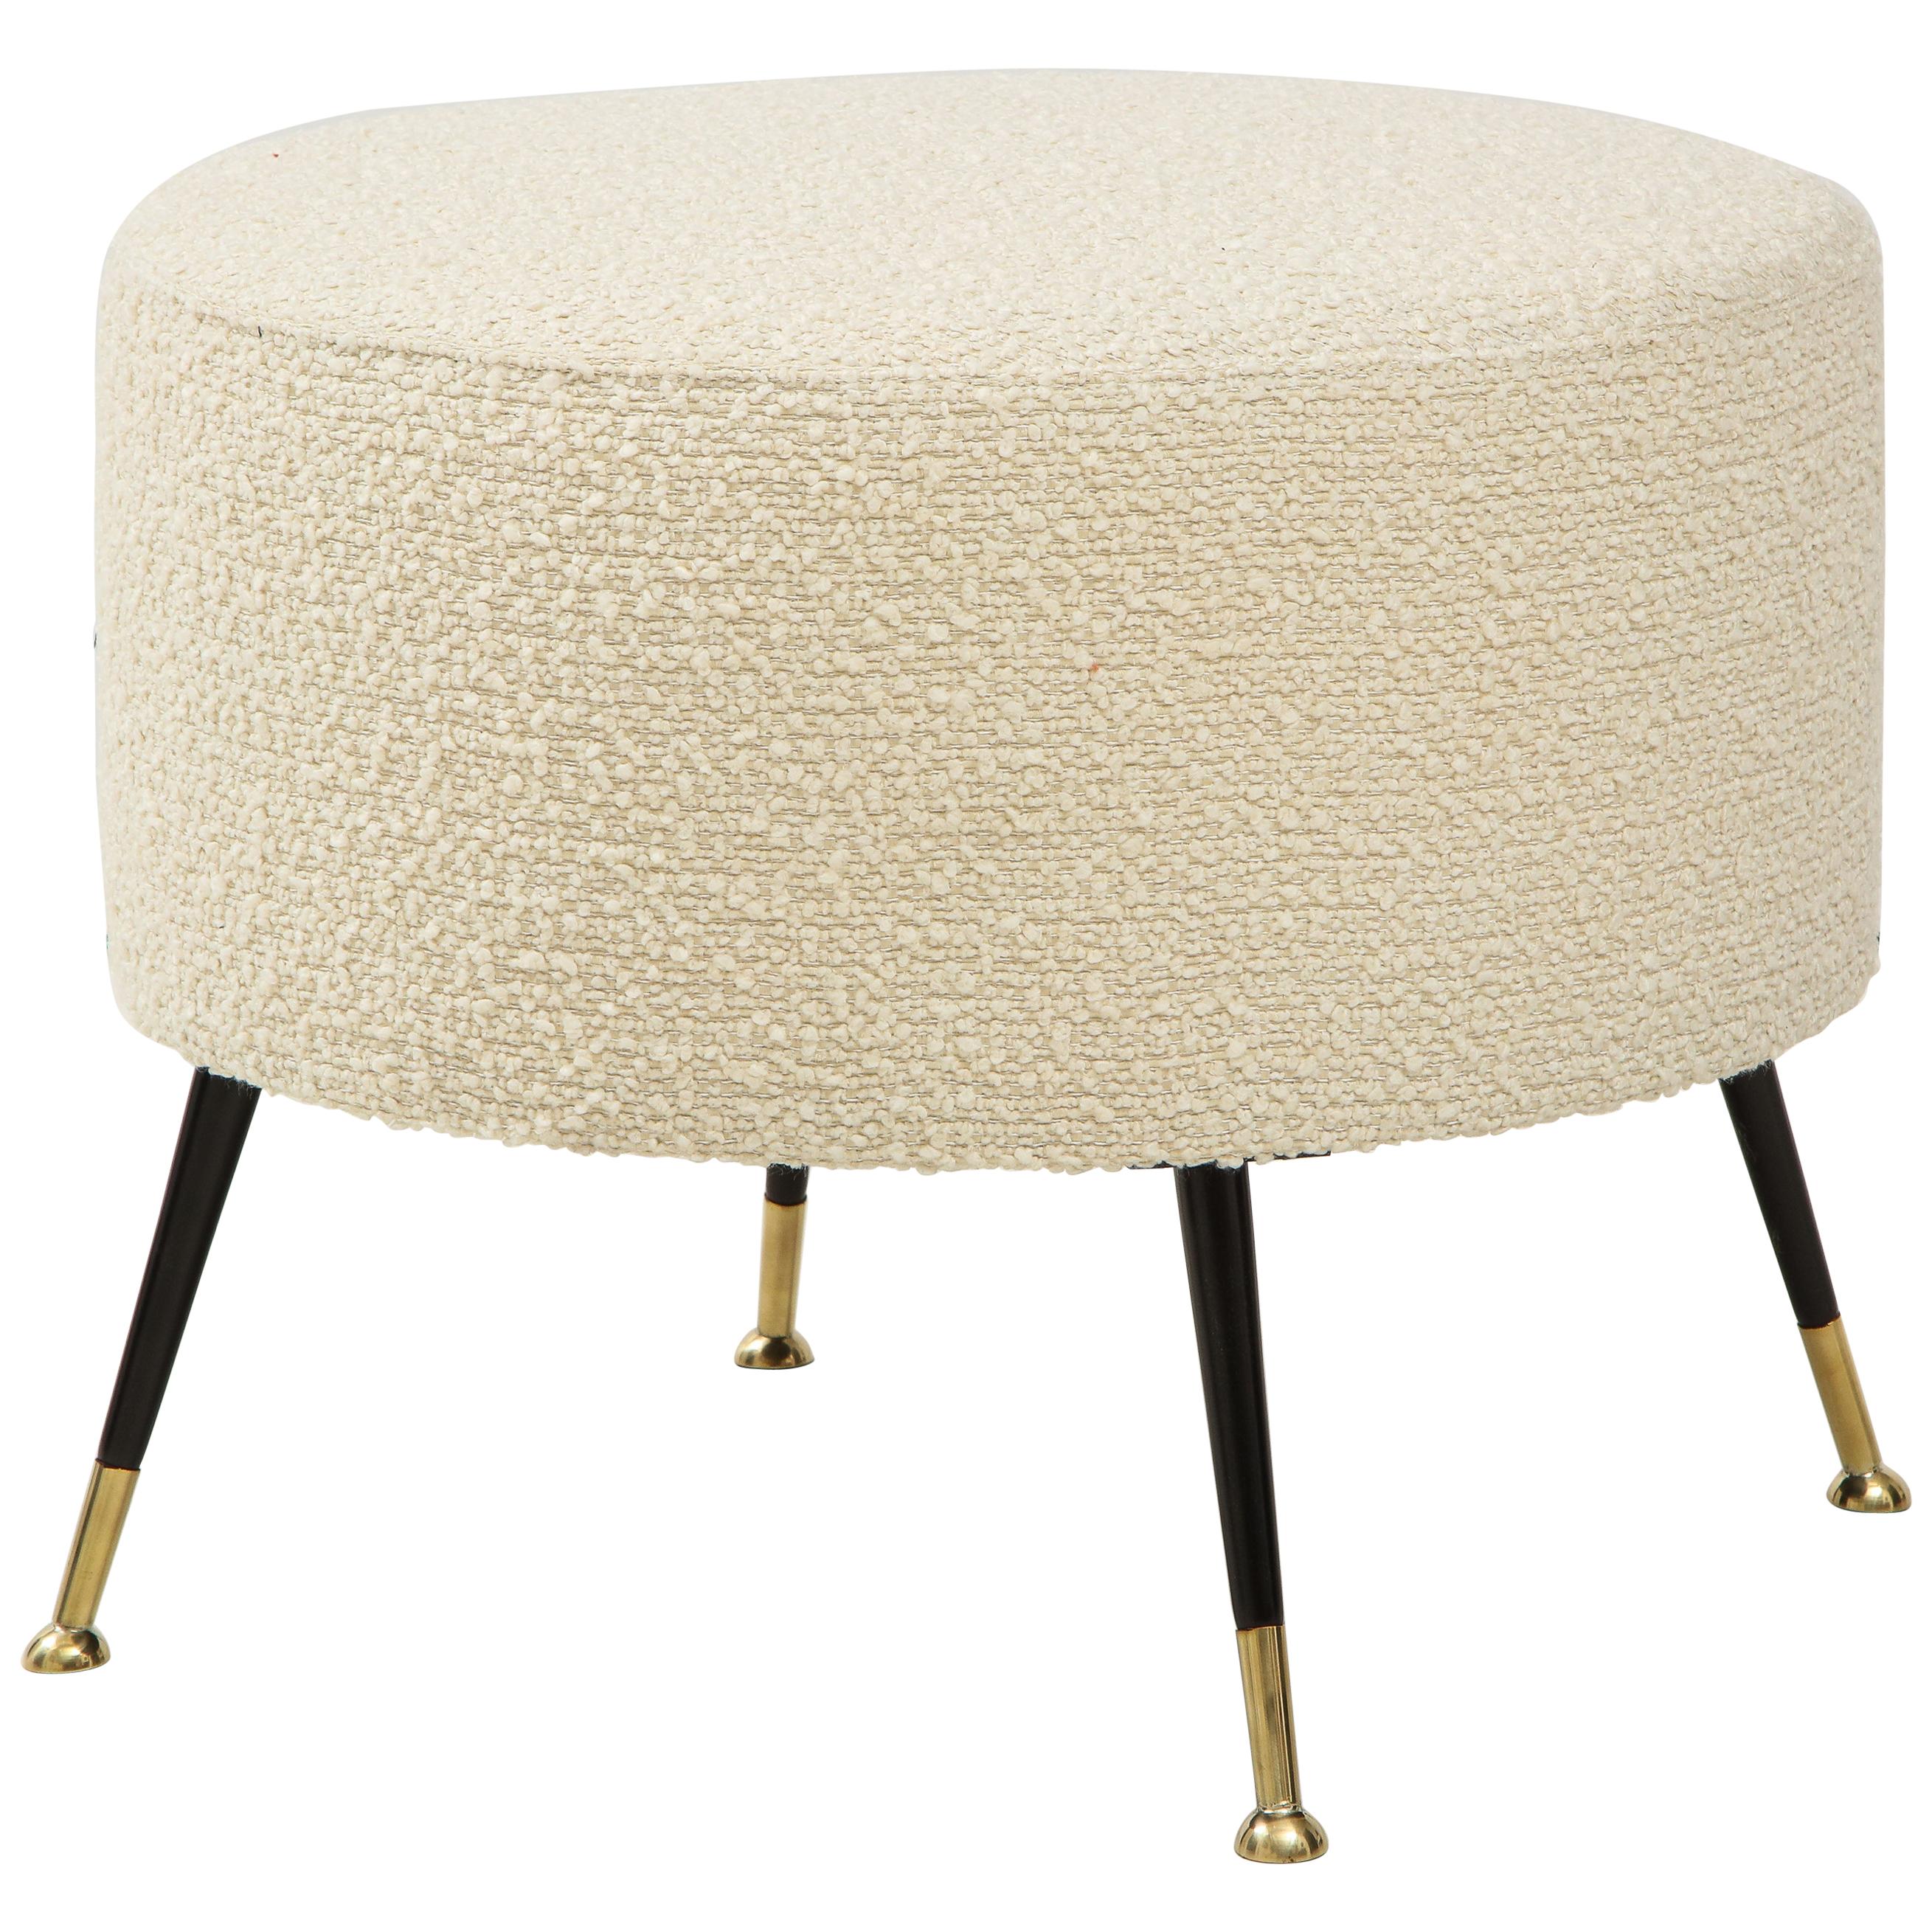 Single Round Stool or Pouf in Ivory Boucle Brass Legs, Italy, 2021